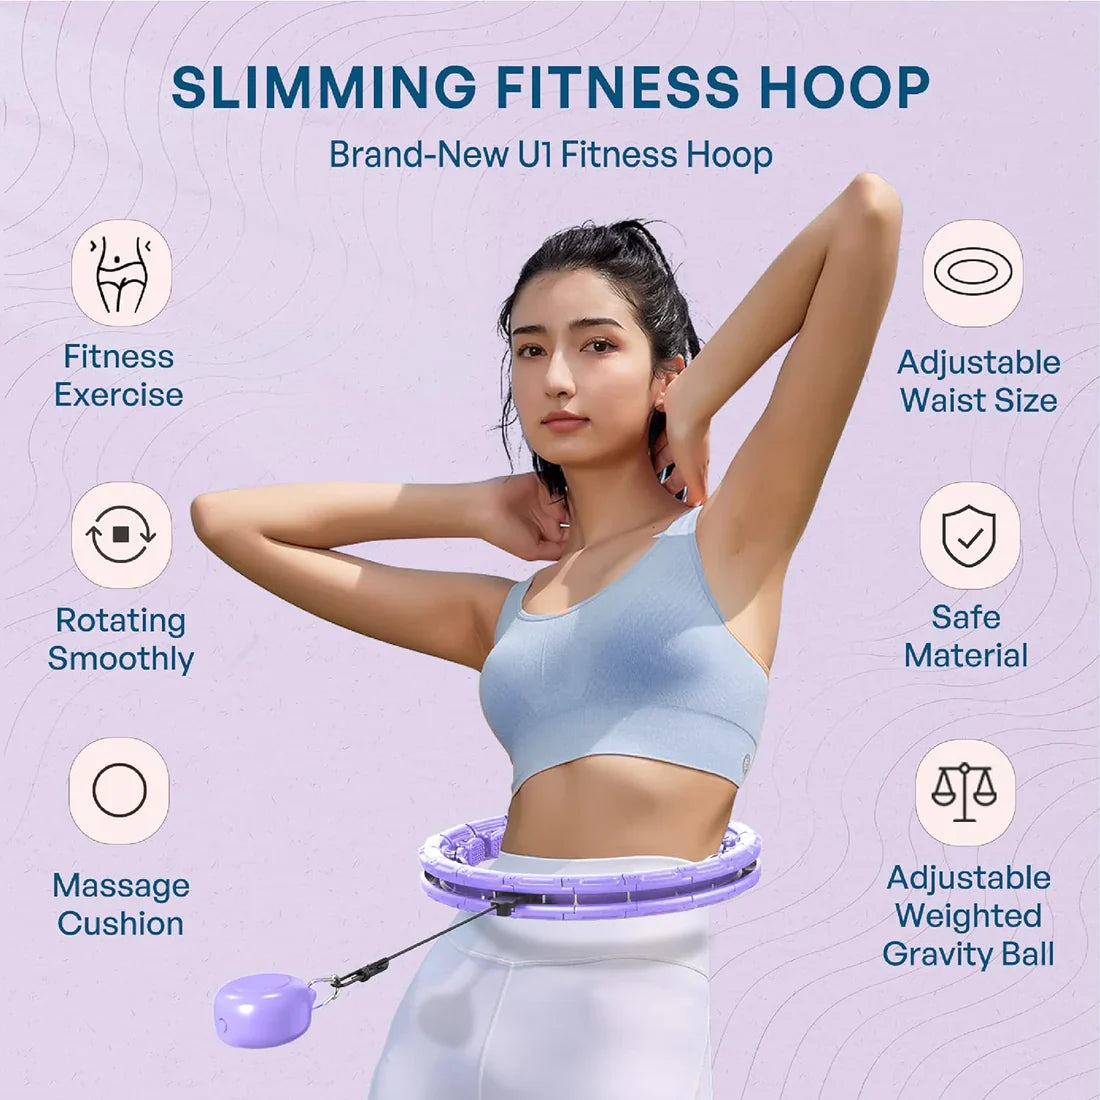 Weighted Hula Hoop Could Burn 700 Calories in 30 Minutes